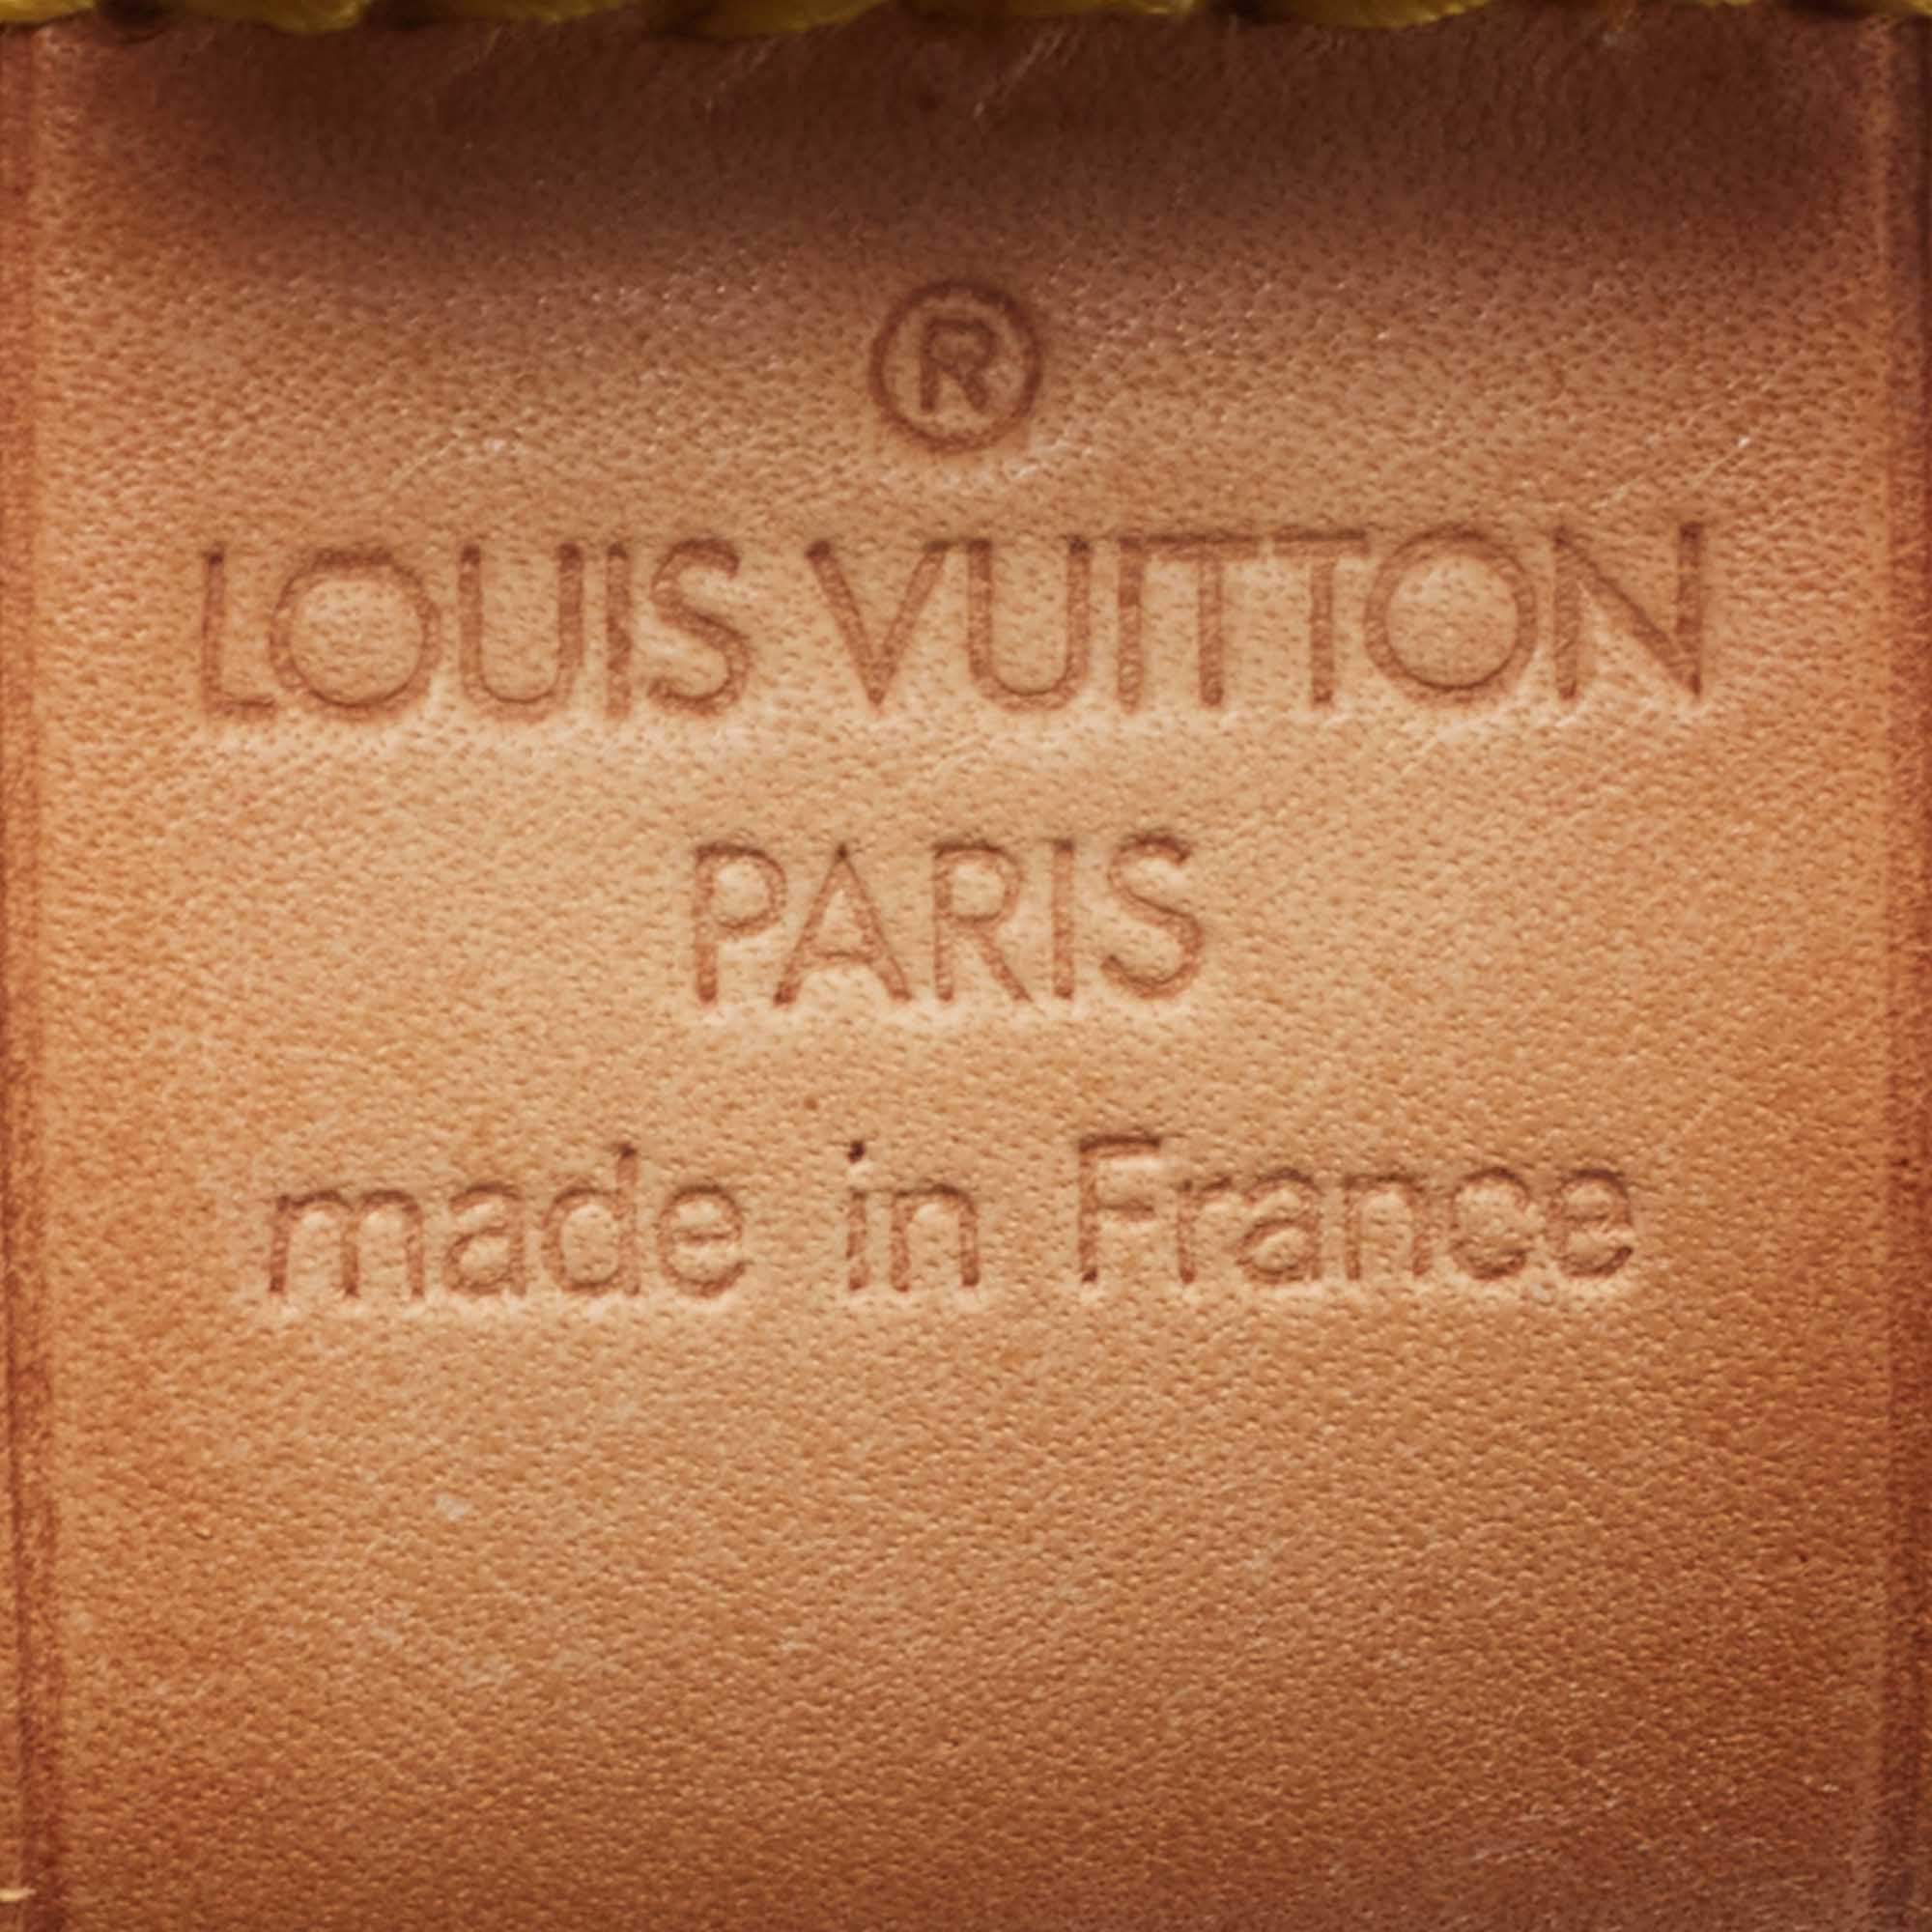 LOUIS VUITTON Name Tag 5 Set Brown Leather Bag Accessories 62877